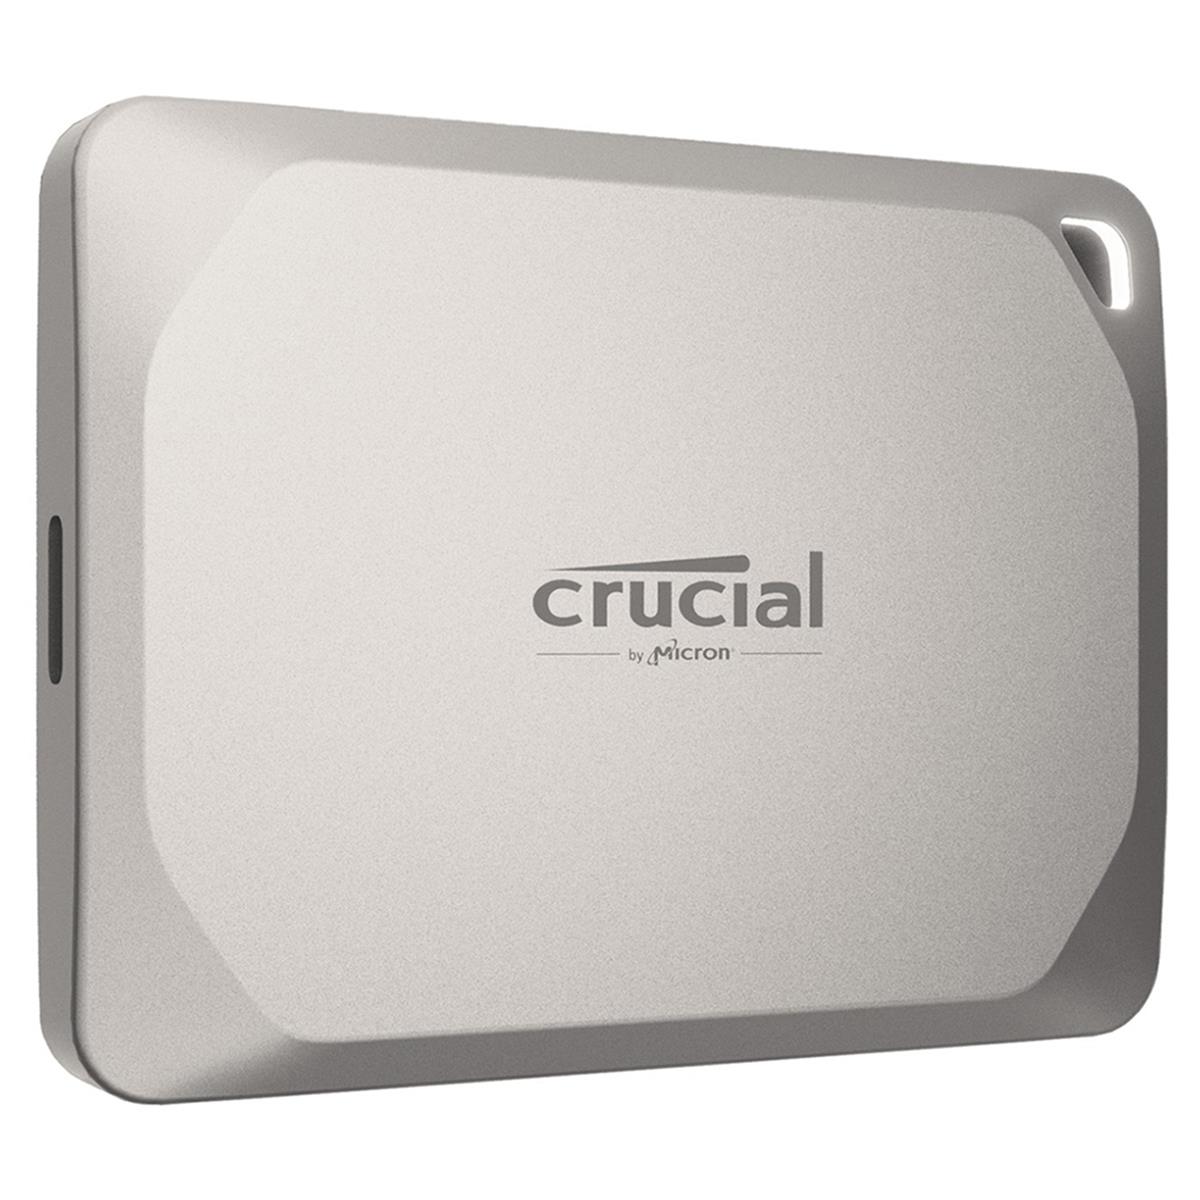 Image of Crucial X9 Pro 2TB USB 3.2 Gen 2 Type-C Portable External SSD for Apple Mac